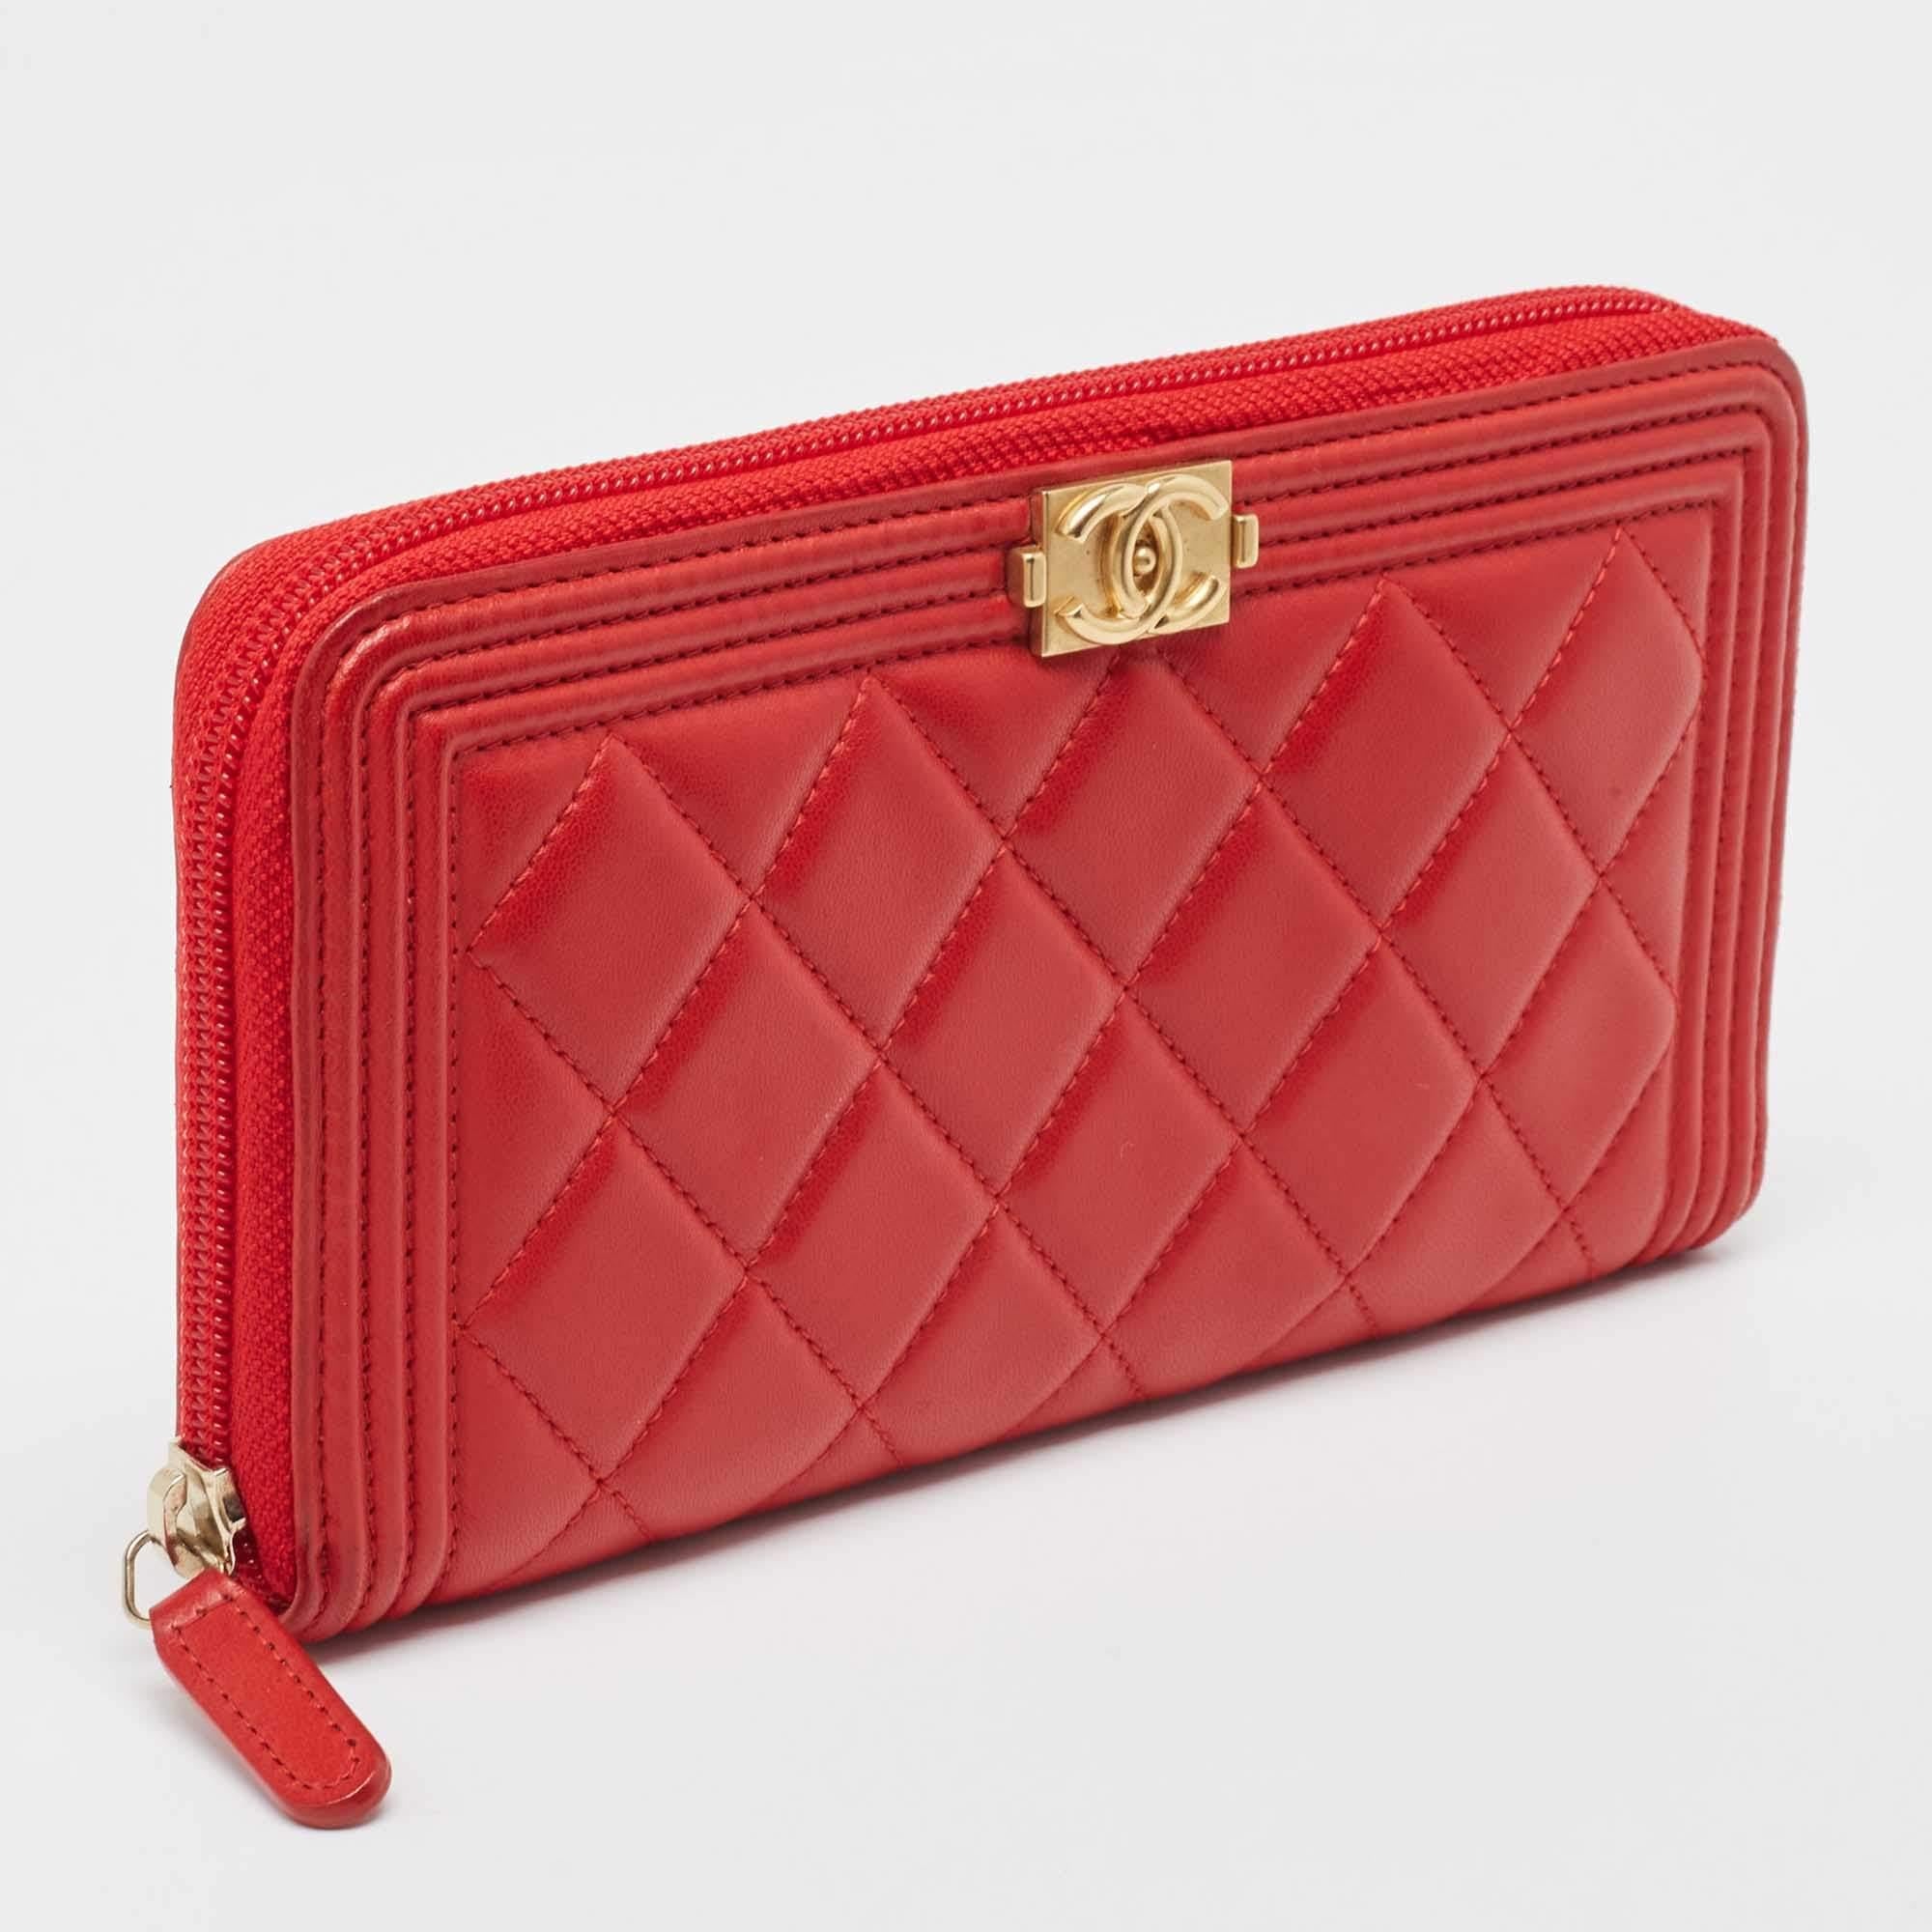 Chanel Red Quilted Leather Boy Zip Around Wallet In Good Condition For Sale In Dubai, Al Qouz 2